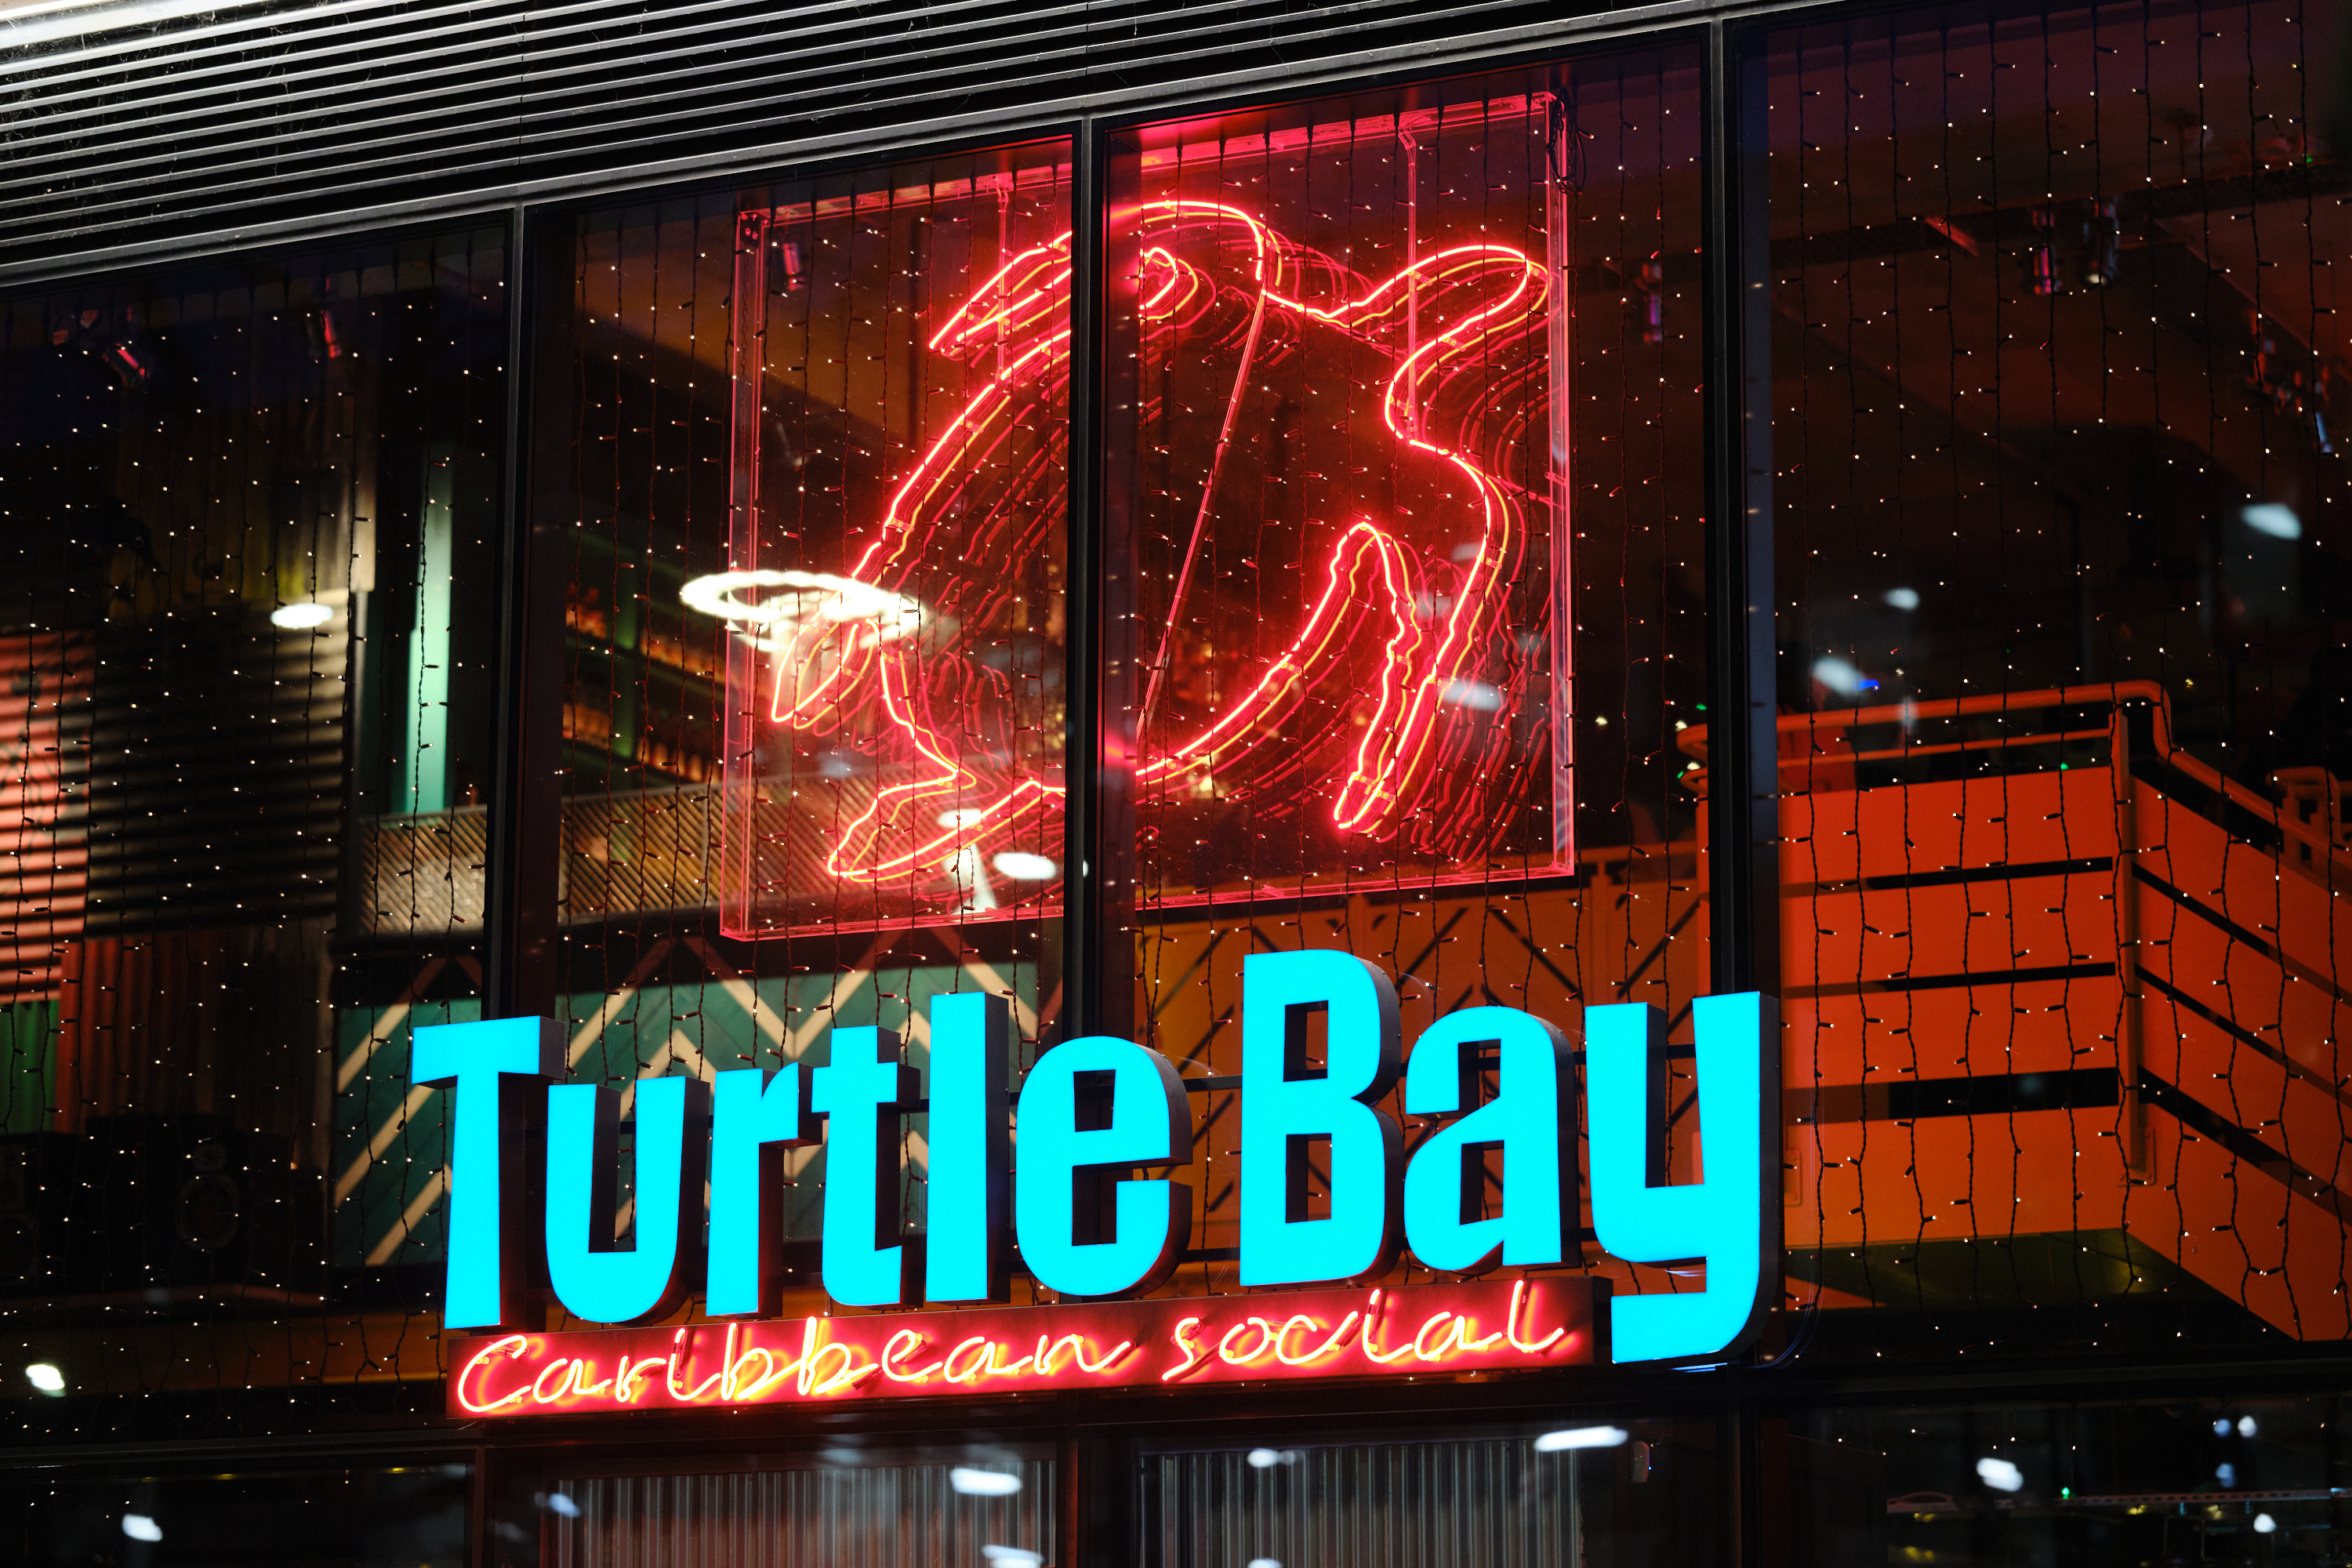 Turtle Bay sign